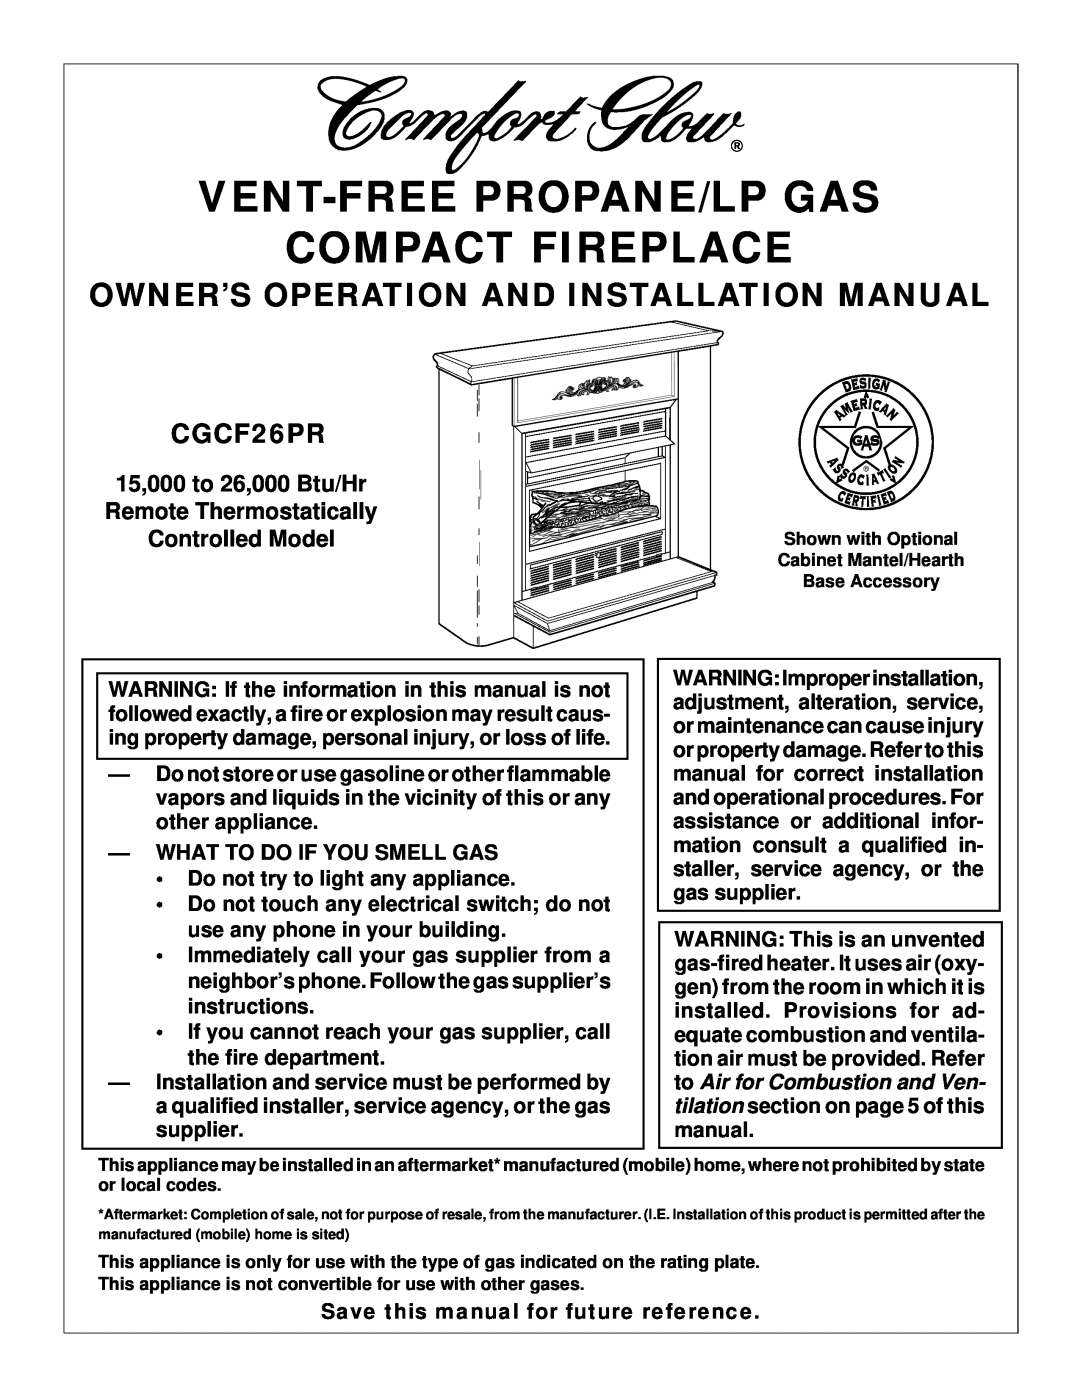 Desa installation manual Owner’S Operation And Installation Manual, What To Do If You Smell Gas, CGCF26PR 